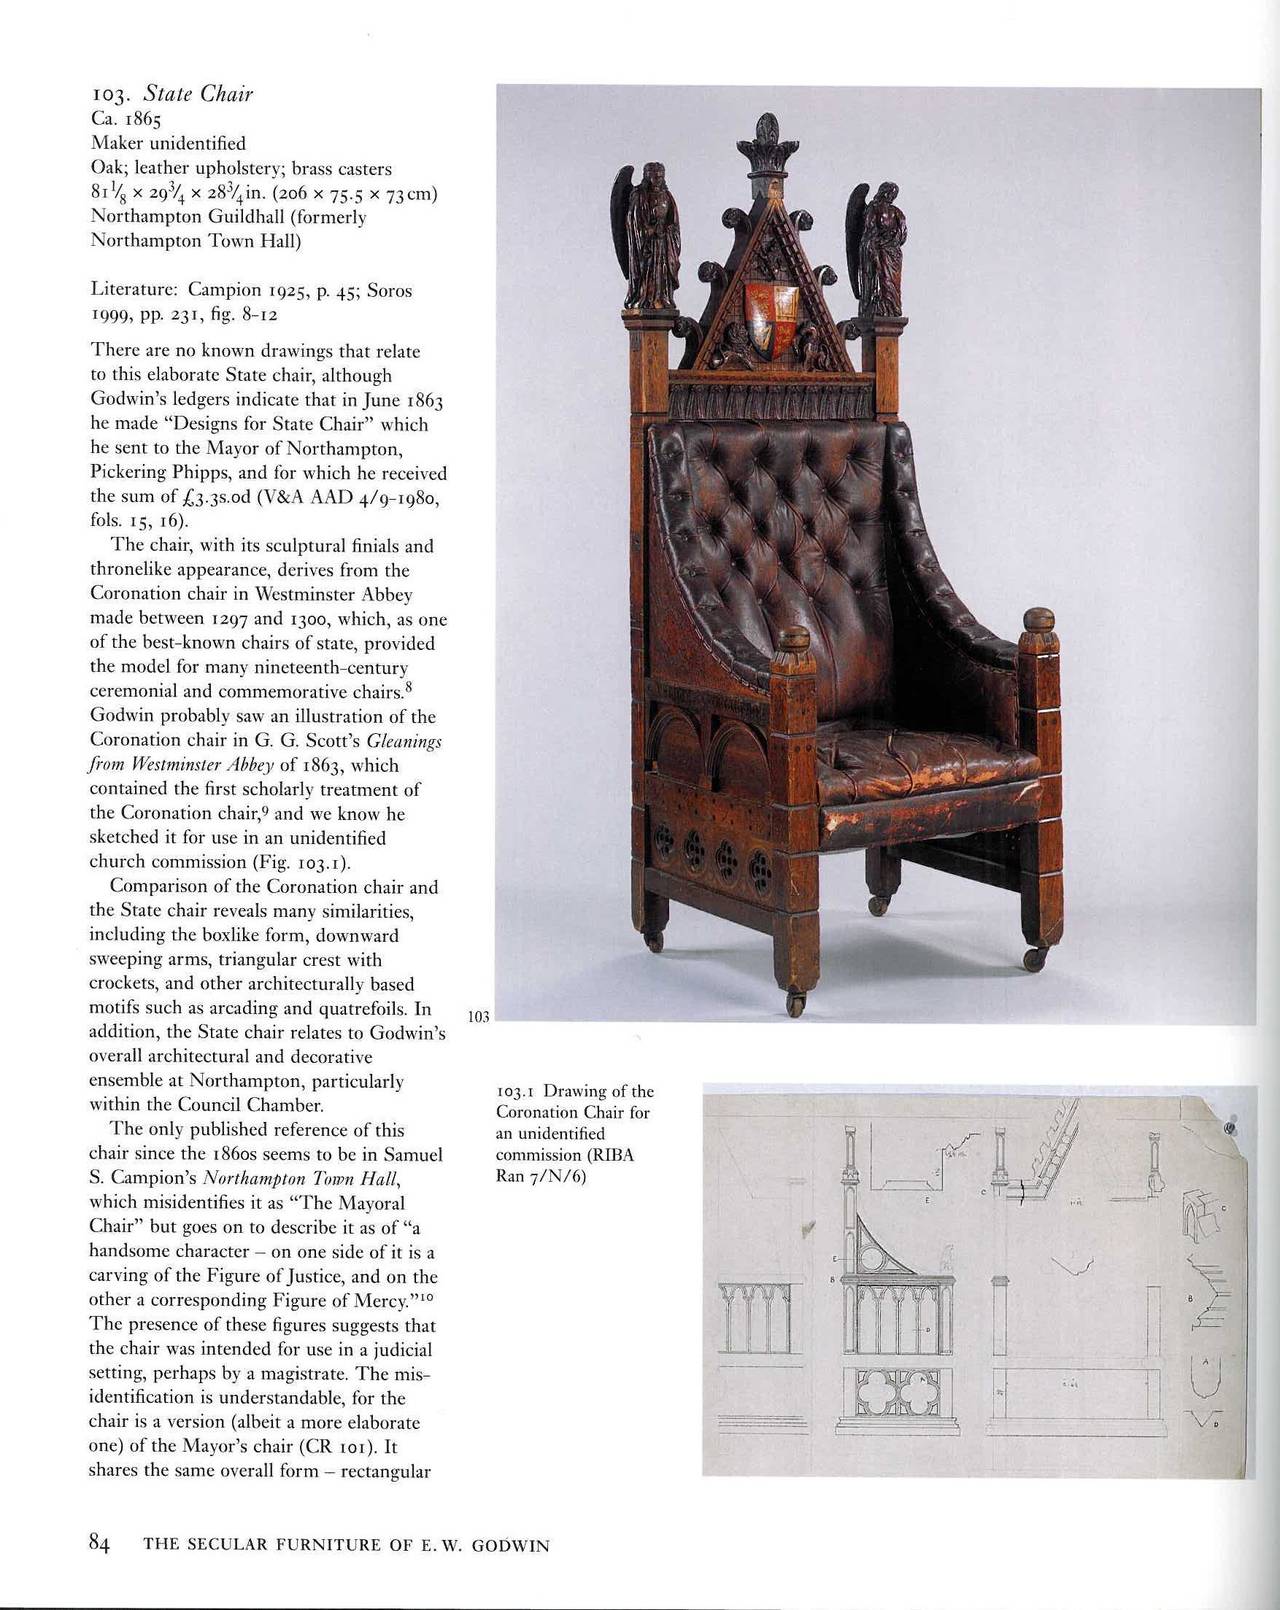 This book is the first comprehensive study of Godwin's furniture designs. Taking the form of a catalogue raisonne, the book documents and reproduces all known examples of his secular furniture and related furniture designs. Seeking to design